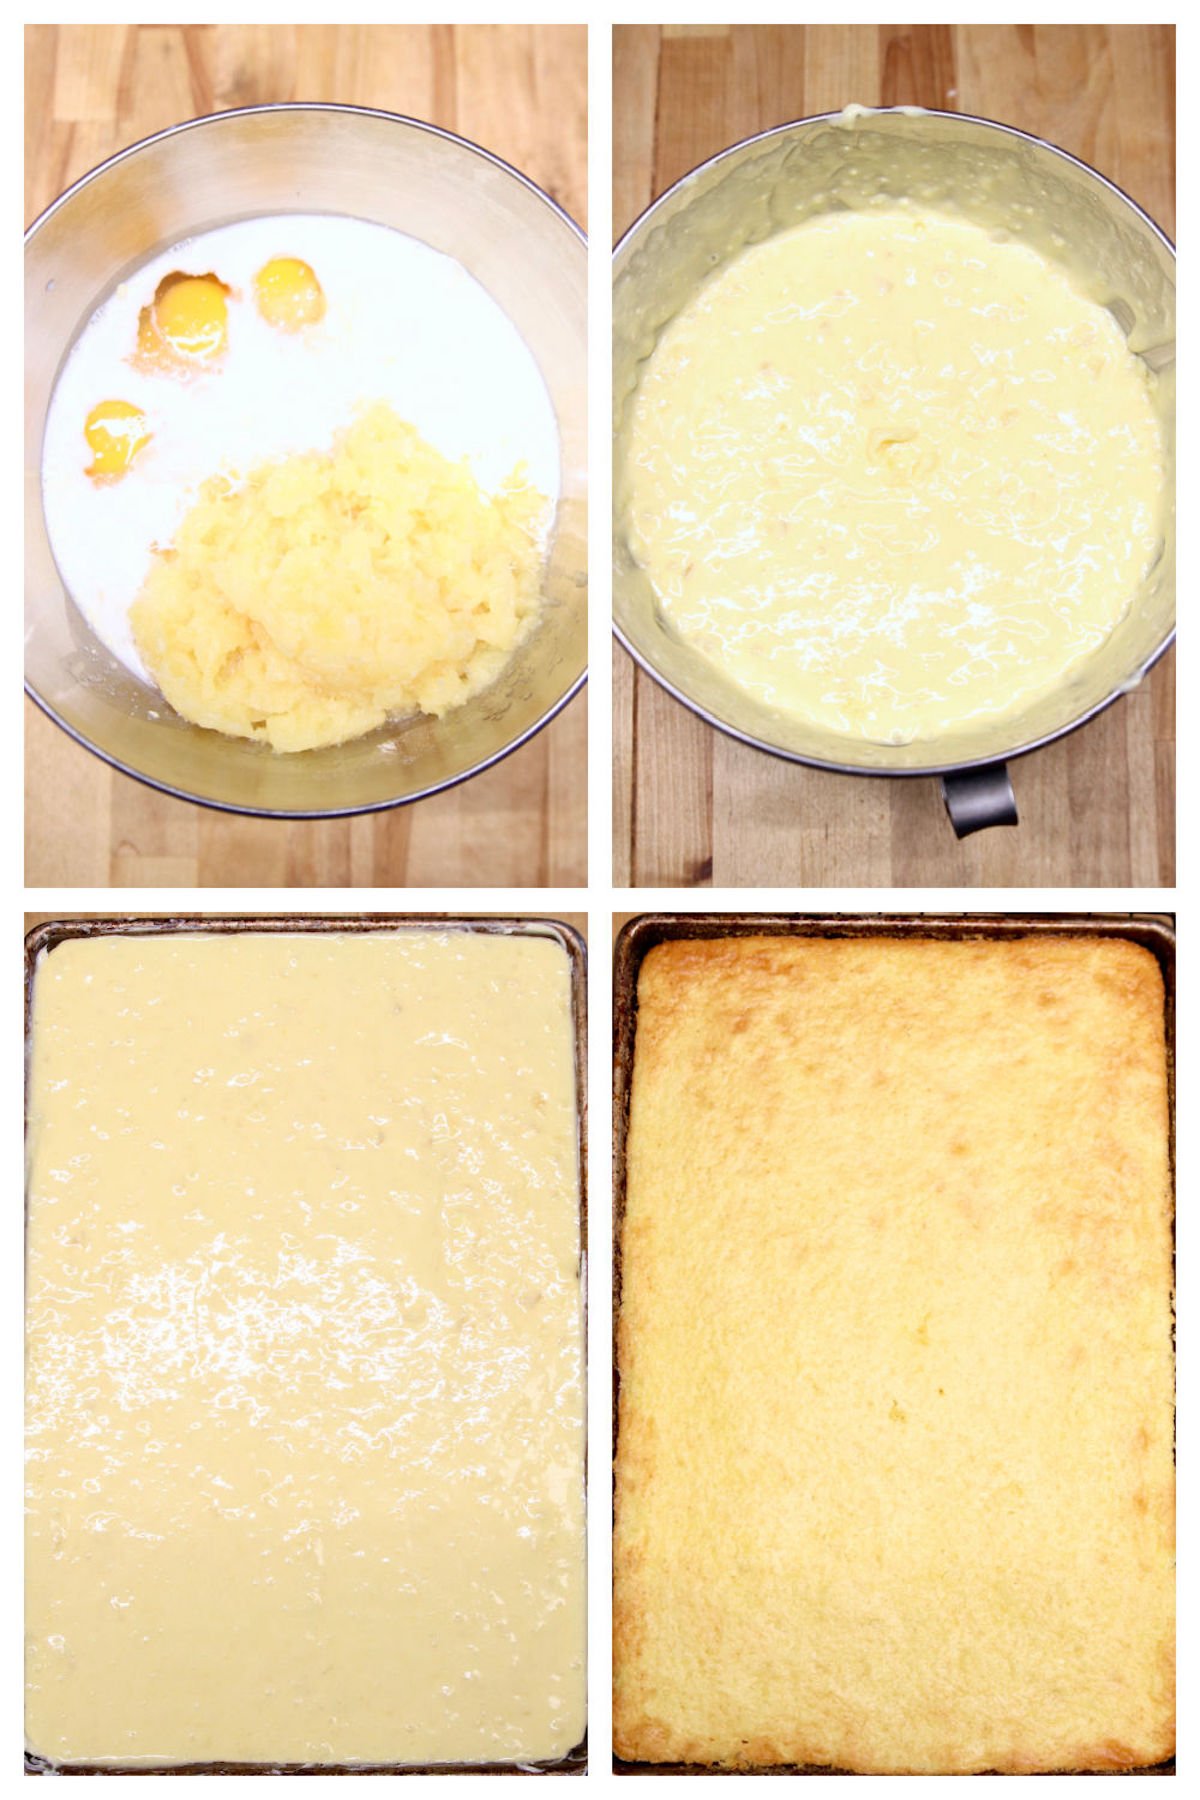 step by step making pineapple sheet cake, mixing in bowl, in cake pan, baked